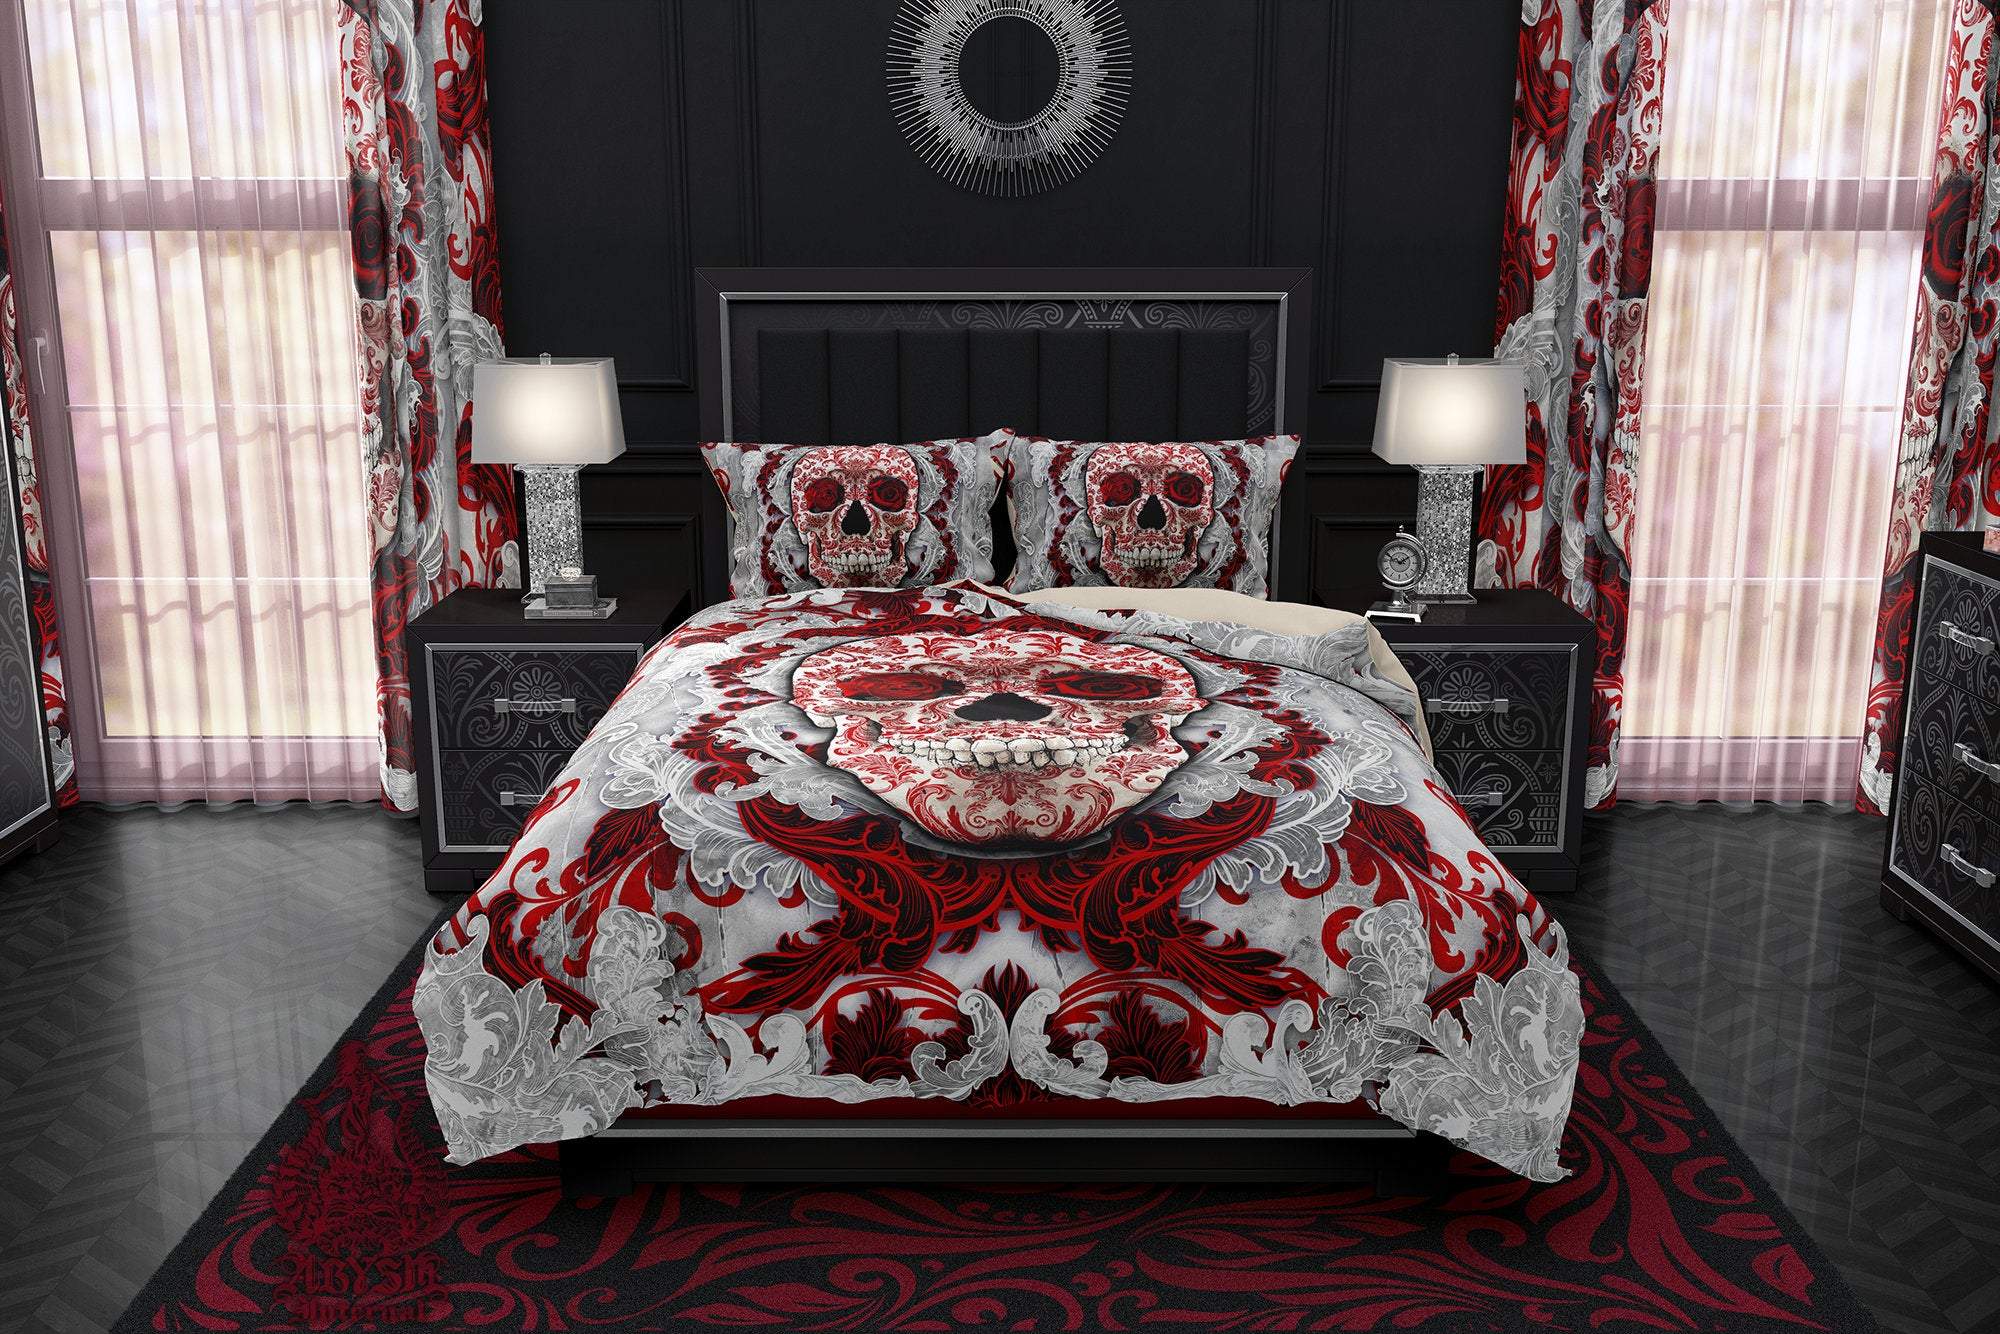 White Goth Bedding Set, Comforter and Duvet, Gothic Bed Cover and Bedroom Decor, King, Queen and Twin Size - Bloody Skull and Black Roses, - Abysm Internal